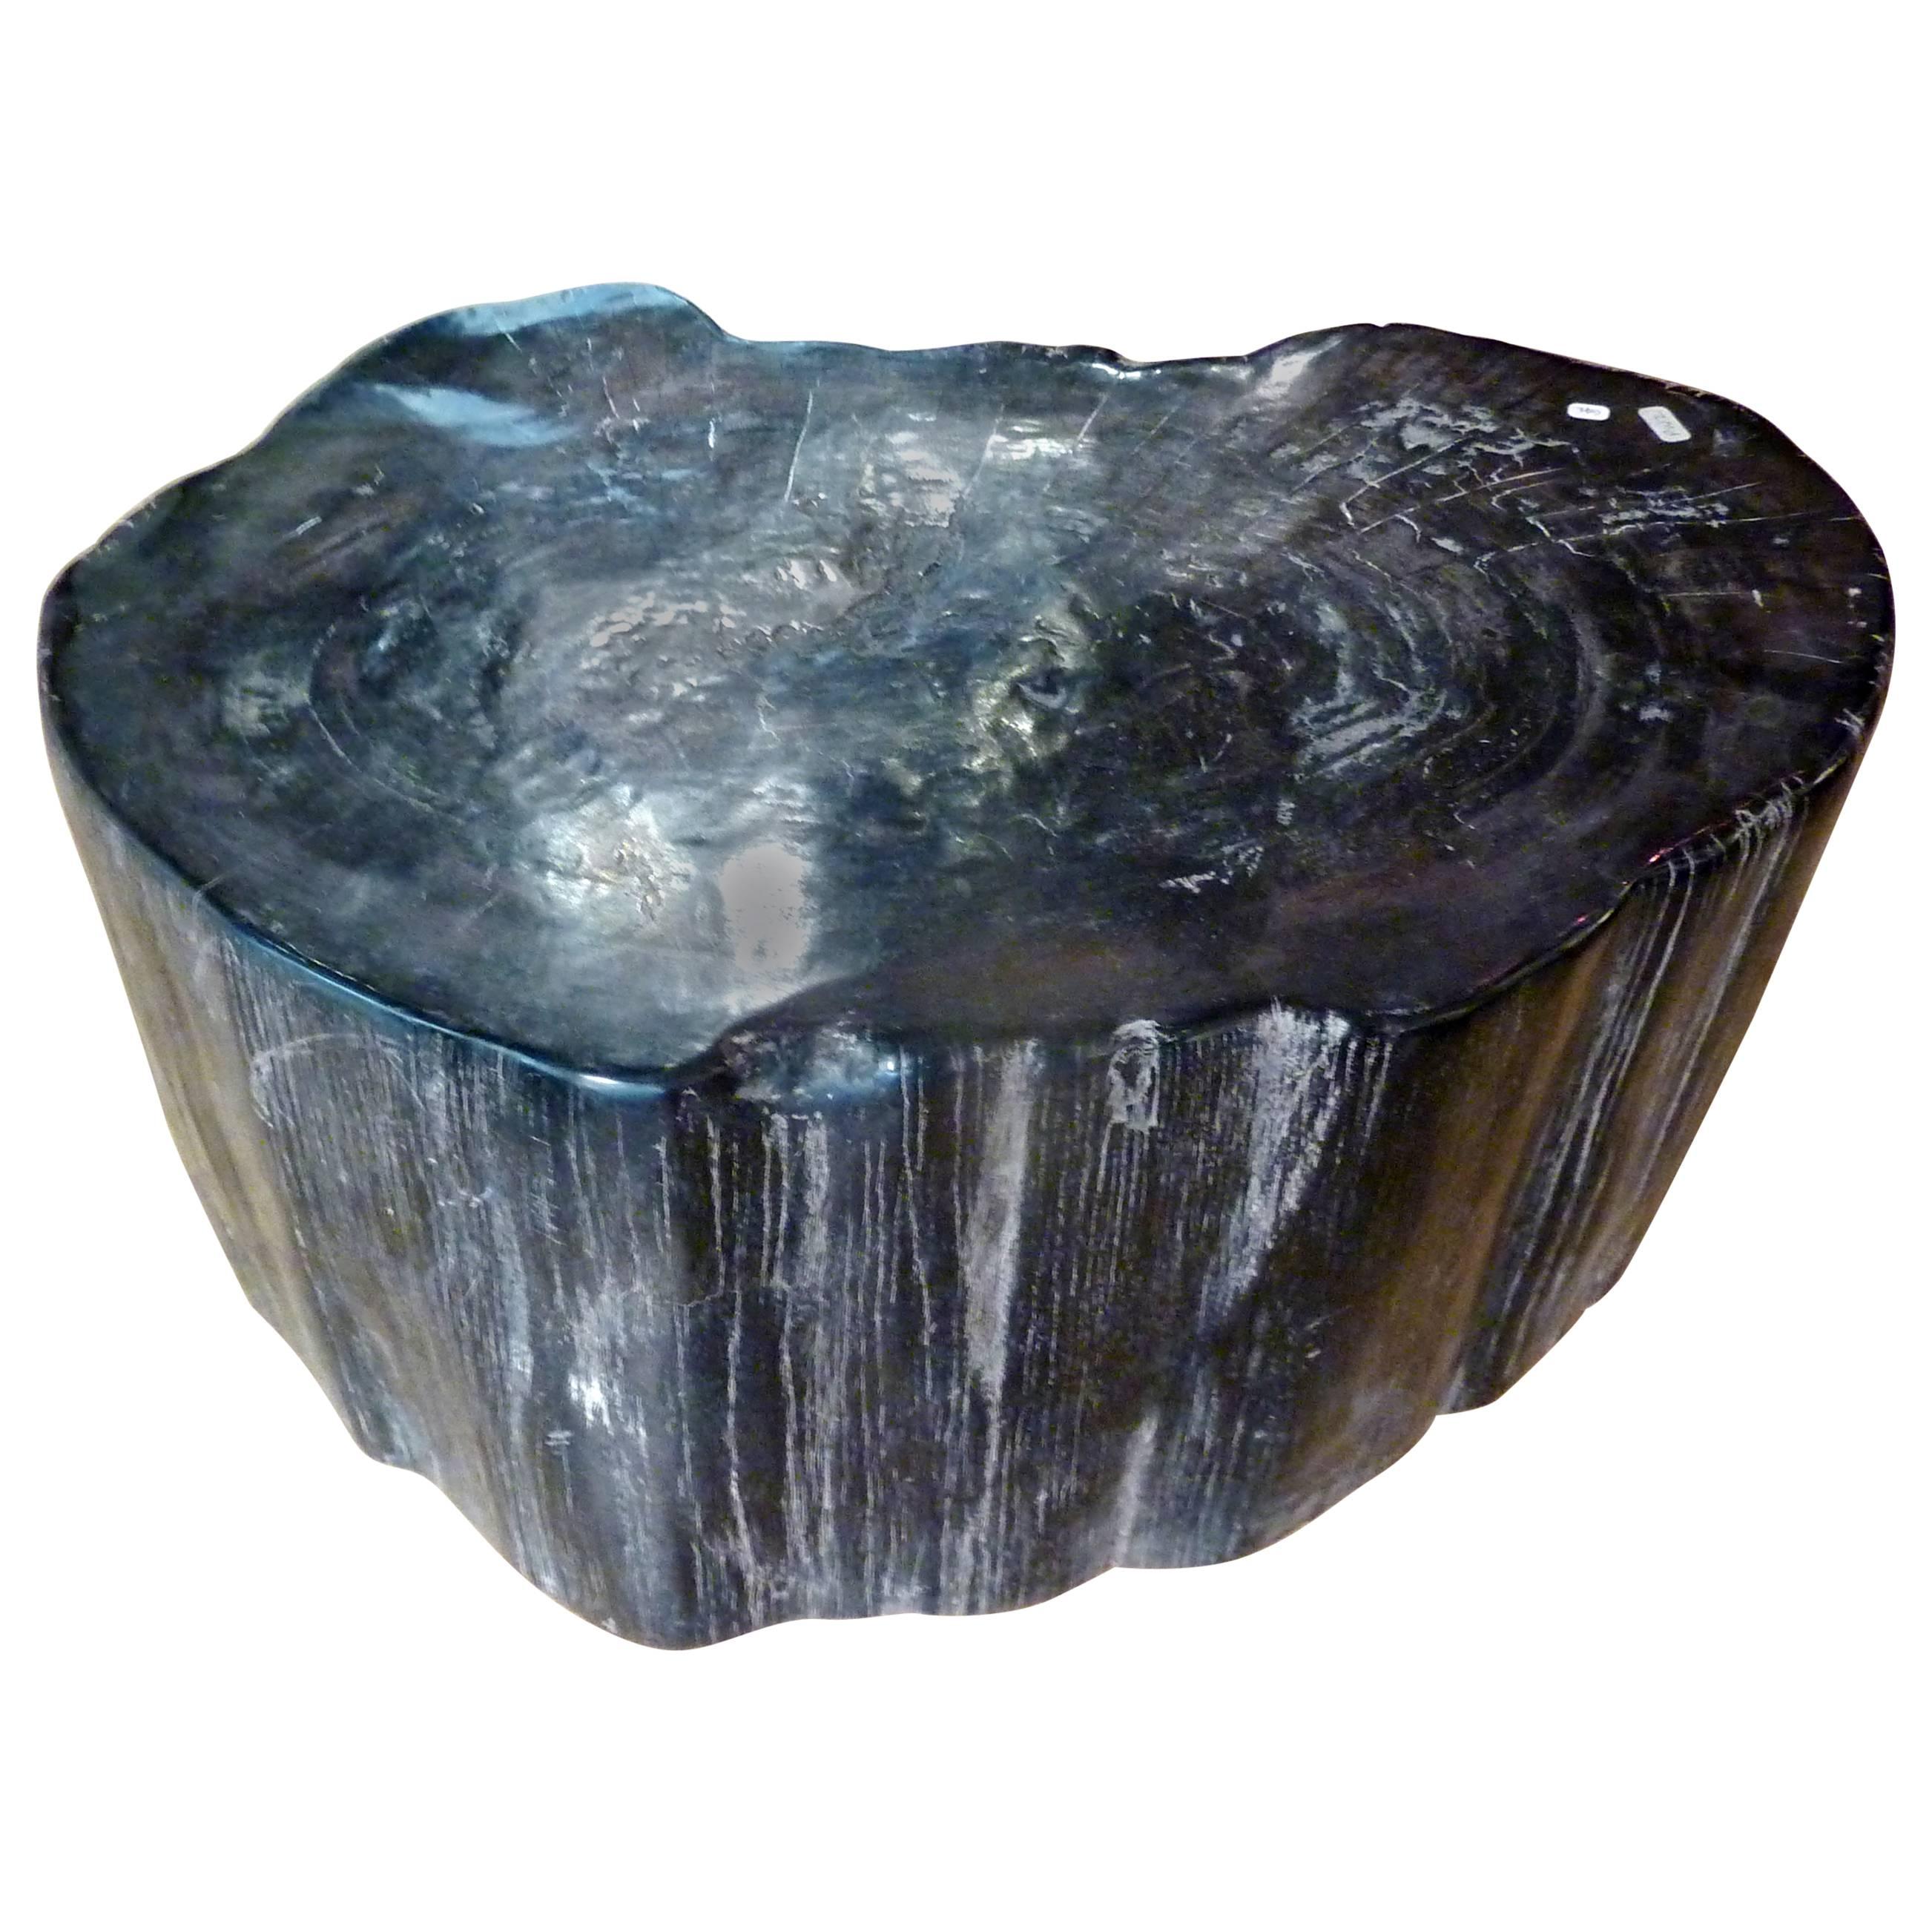 Petrified Wood Table or Seat